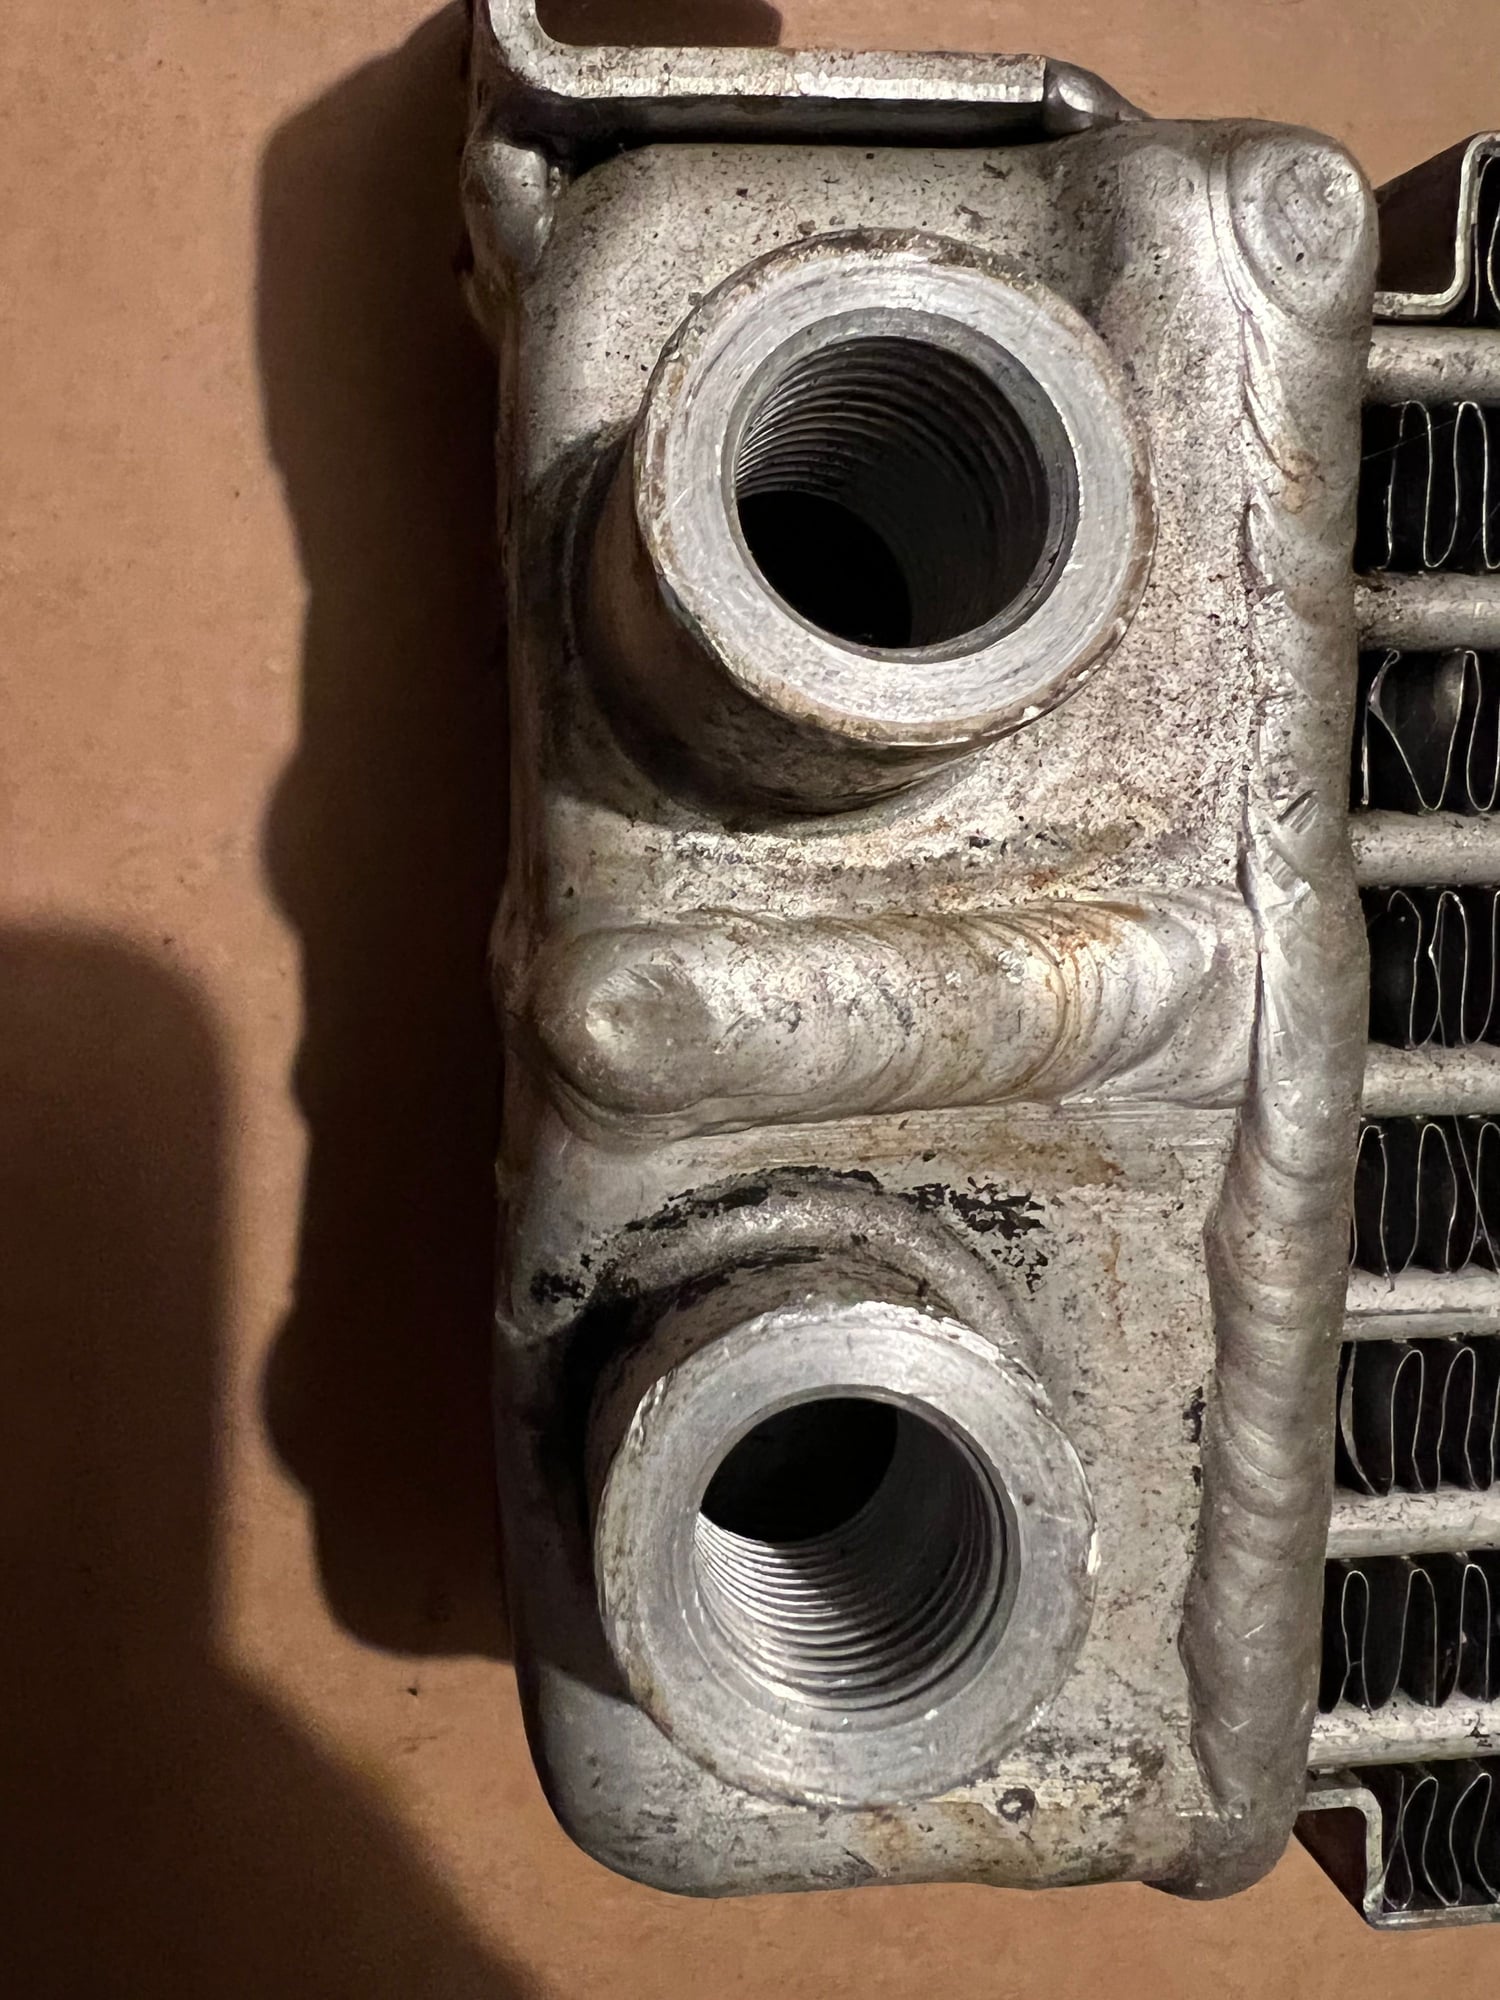 Miscellaneous - 1982-1985 oil cooler. $250 with shipping. No leaks! - Used - 1982 to 1985 Mazda RX-7 - Portland, OR 97223, United States